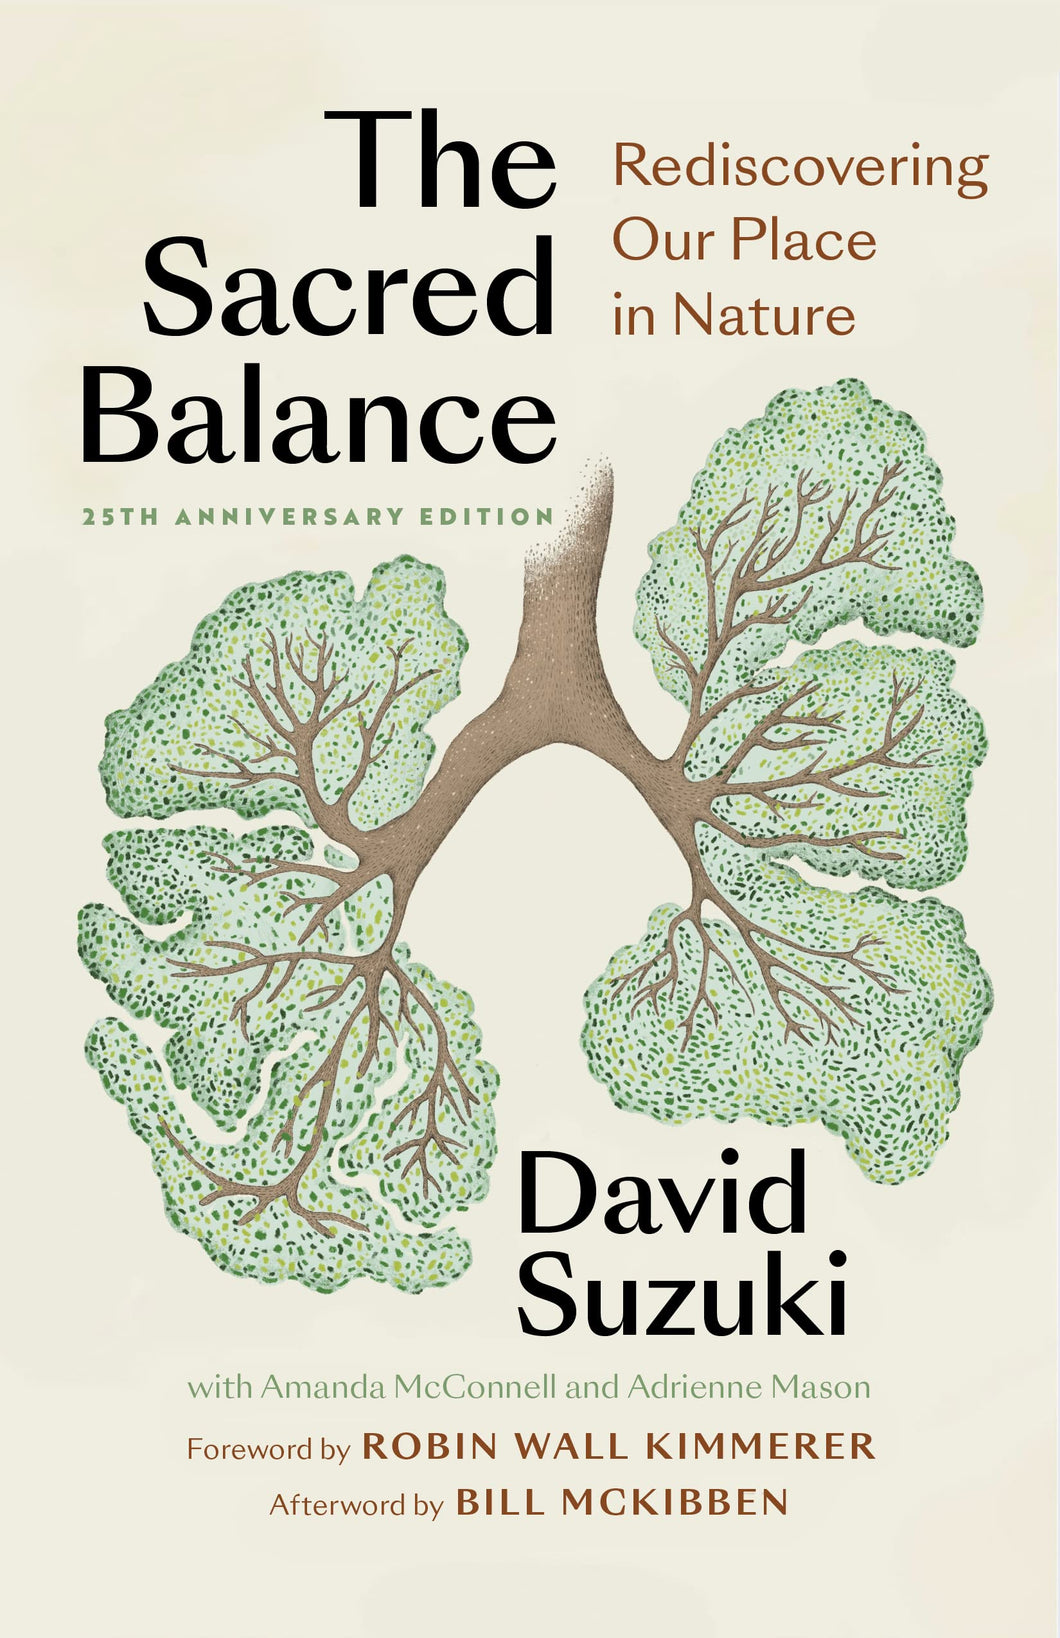 The Sacred Balance 25th Anniversary Edition: Rediscovering Our Place In Nature [David Suzuki]